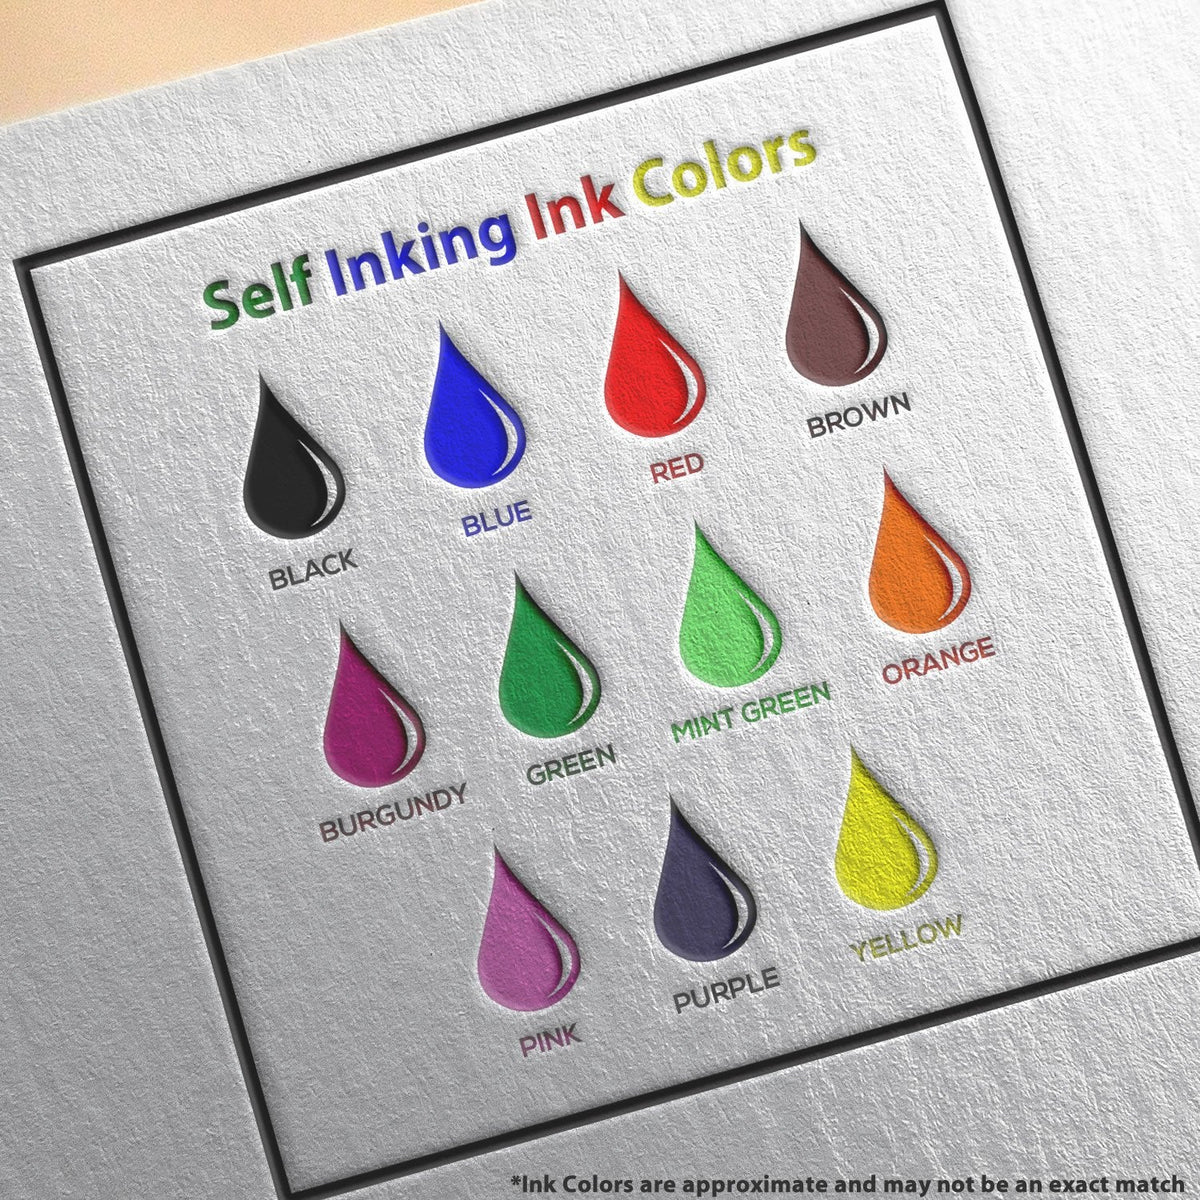 Self-Inking Round FYI Stamp Ink Color Options